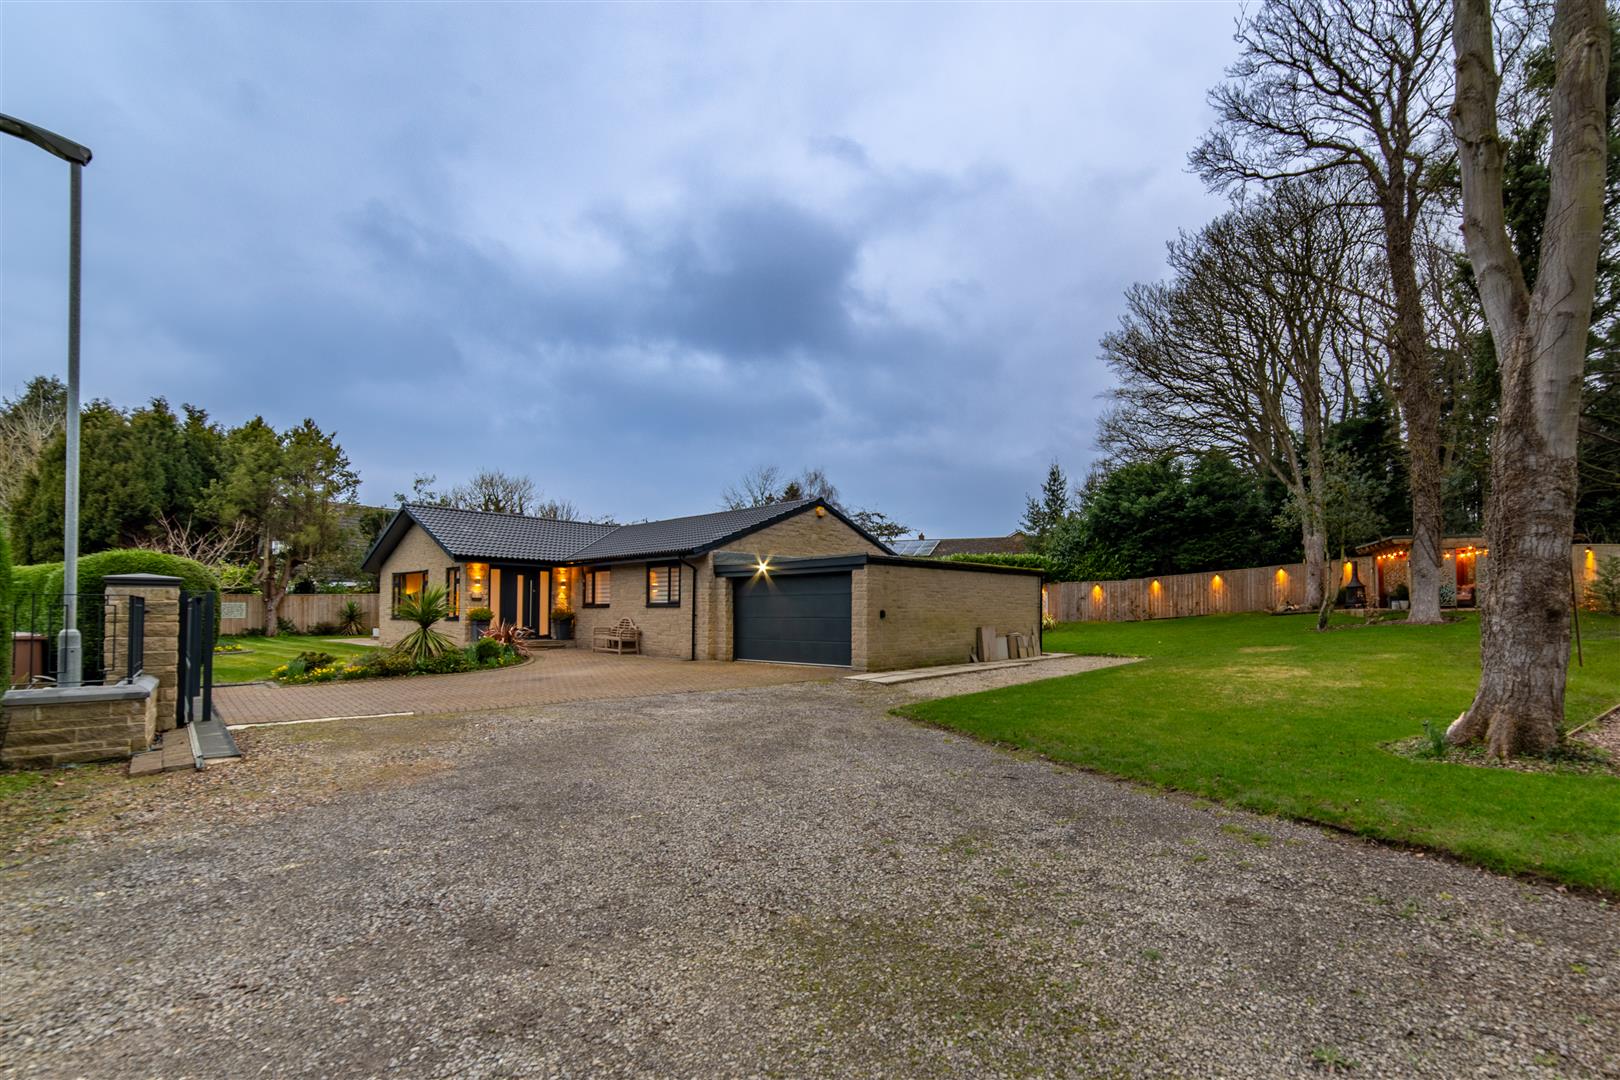 3 bed detached bungalow for sale in Crofts Park, Morpeth - Property Image 1